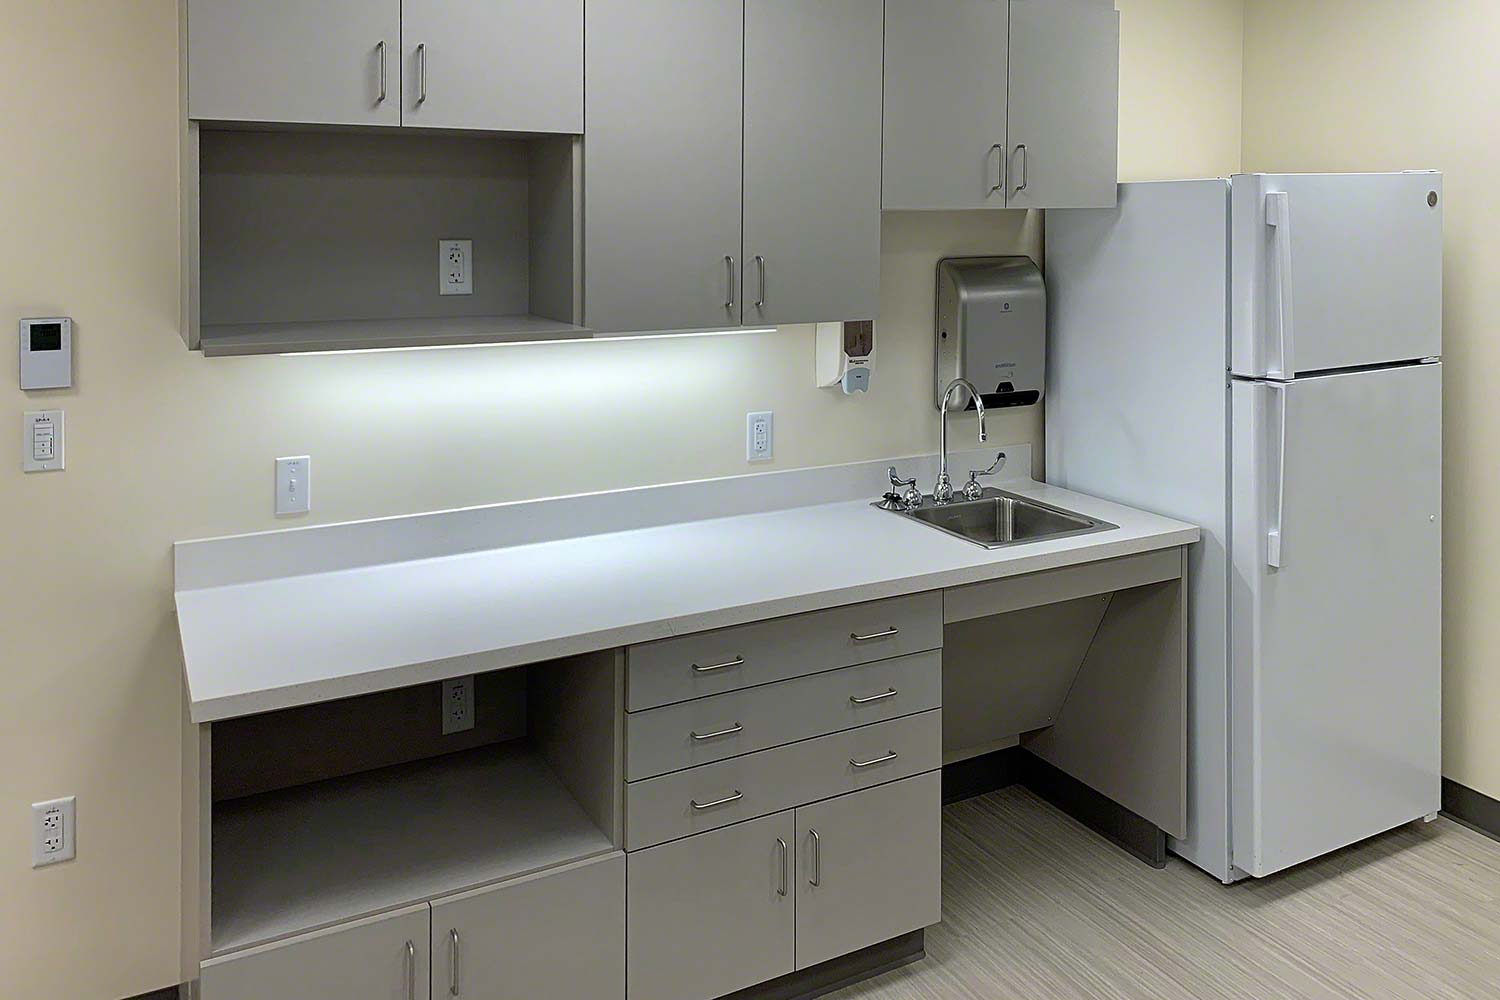 assisted living facility casework Commercial Casework and Cabinets